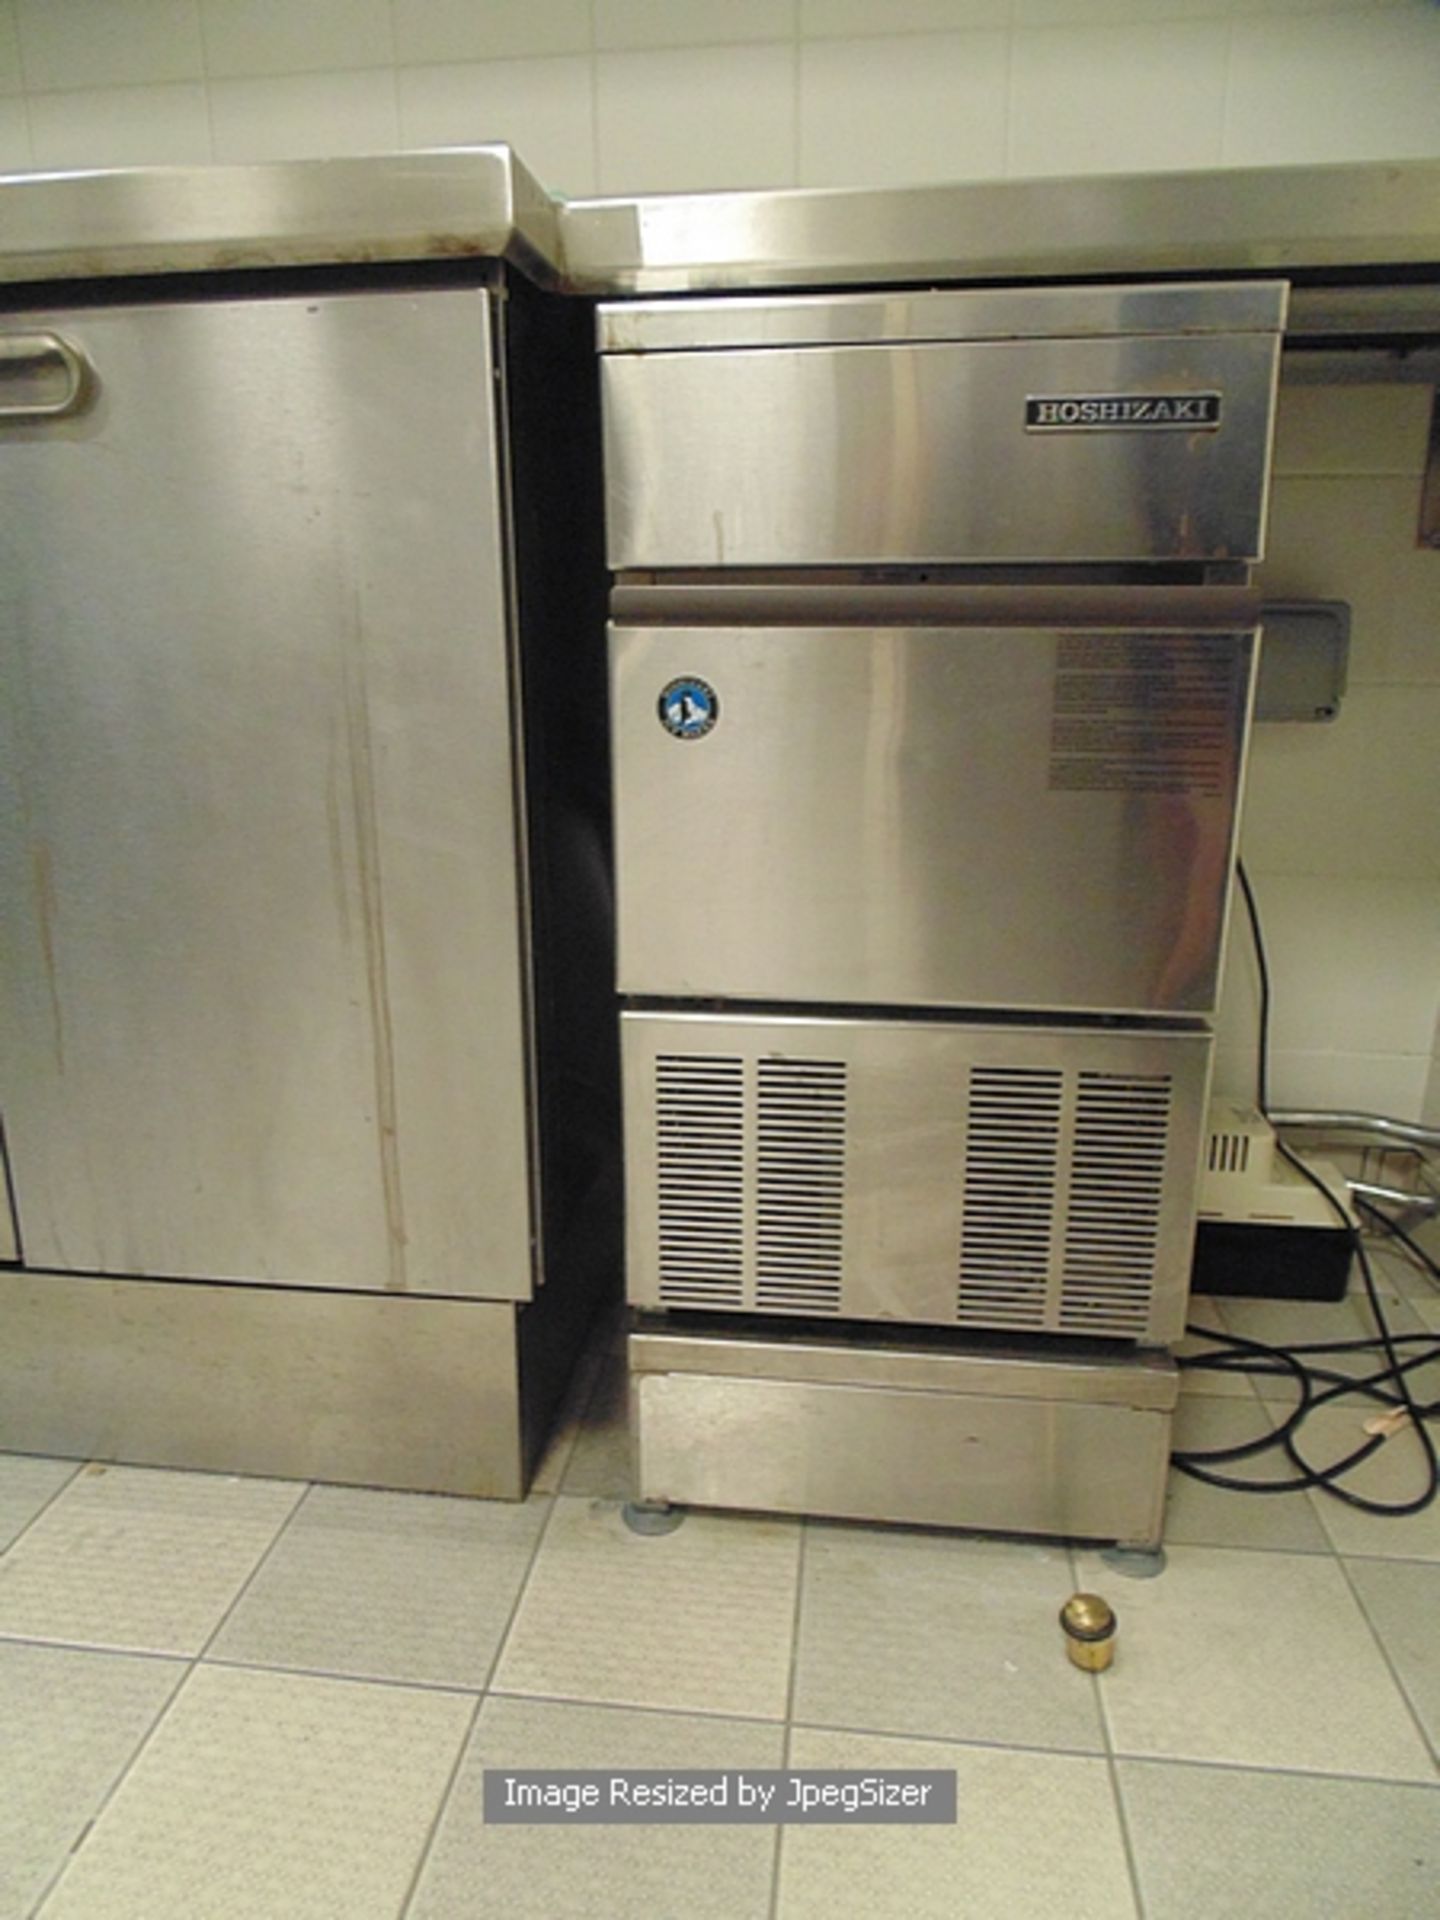 Hoshizaki IM30CLE self-contained cube ice maker production 28kgs/24 hrs bin storage - 11.5kgs cube